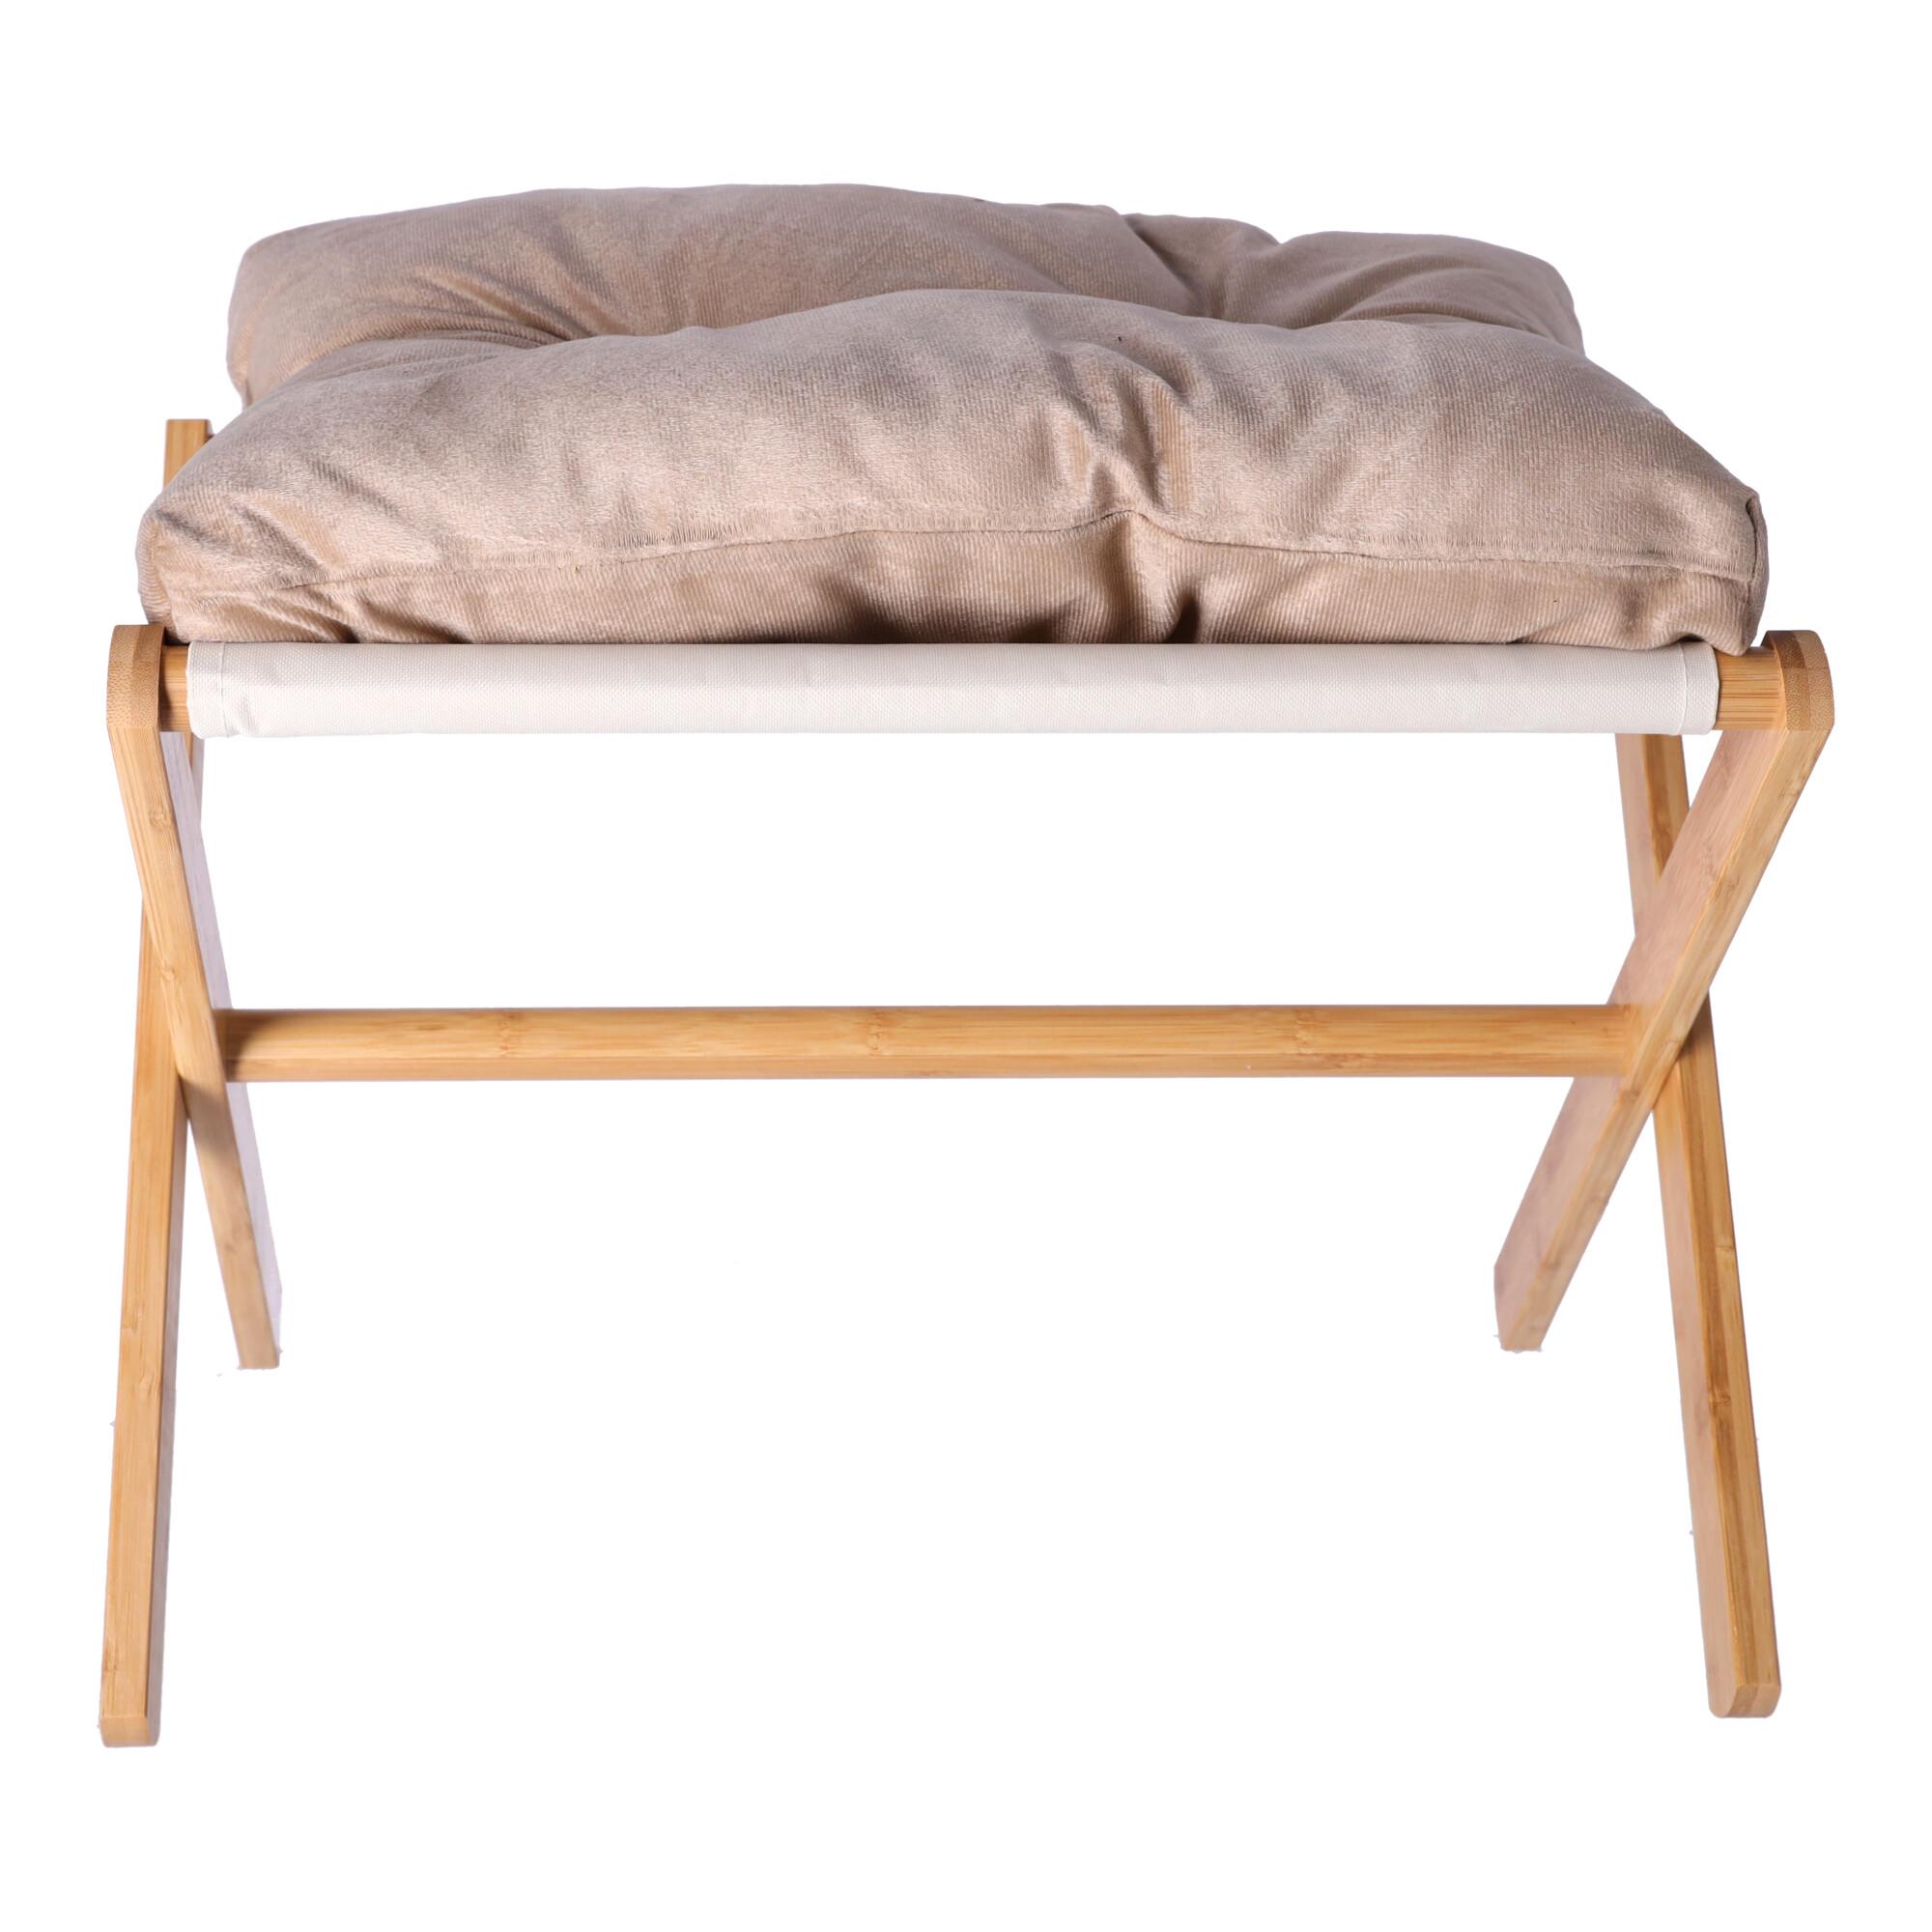 Bench, pouffe with a seat - light brown, large